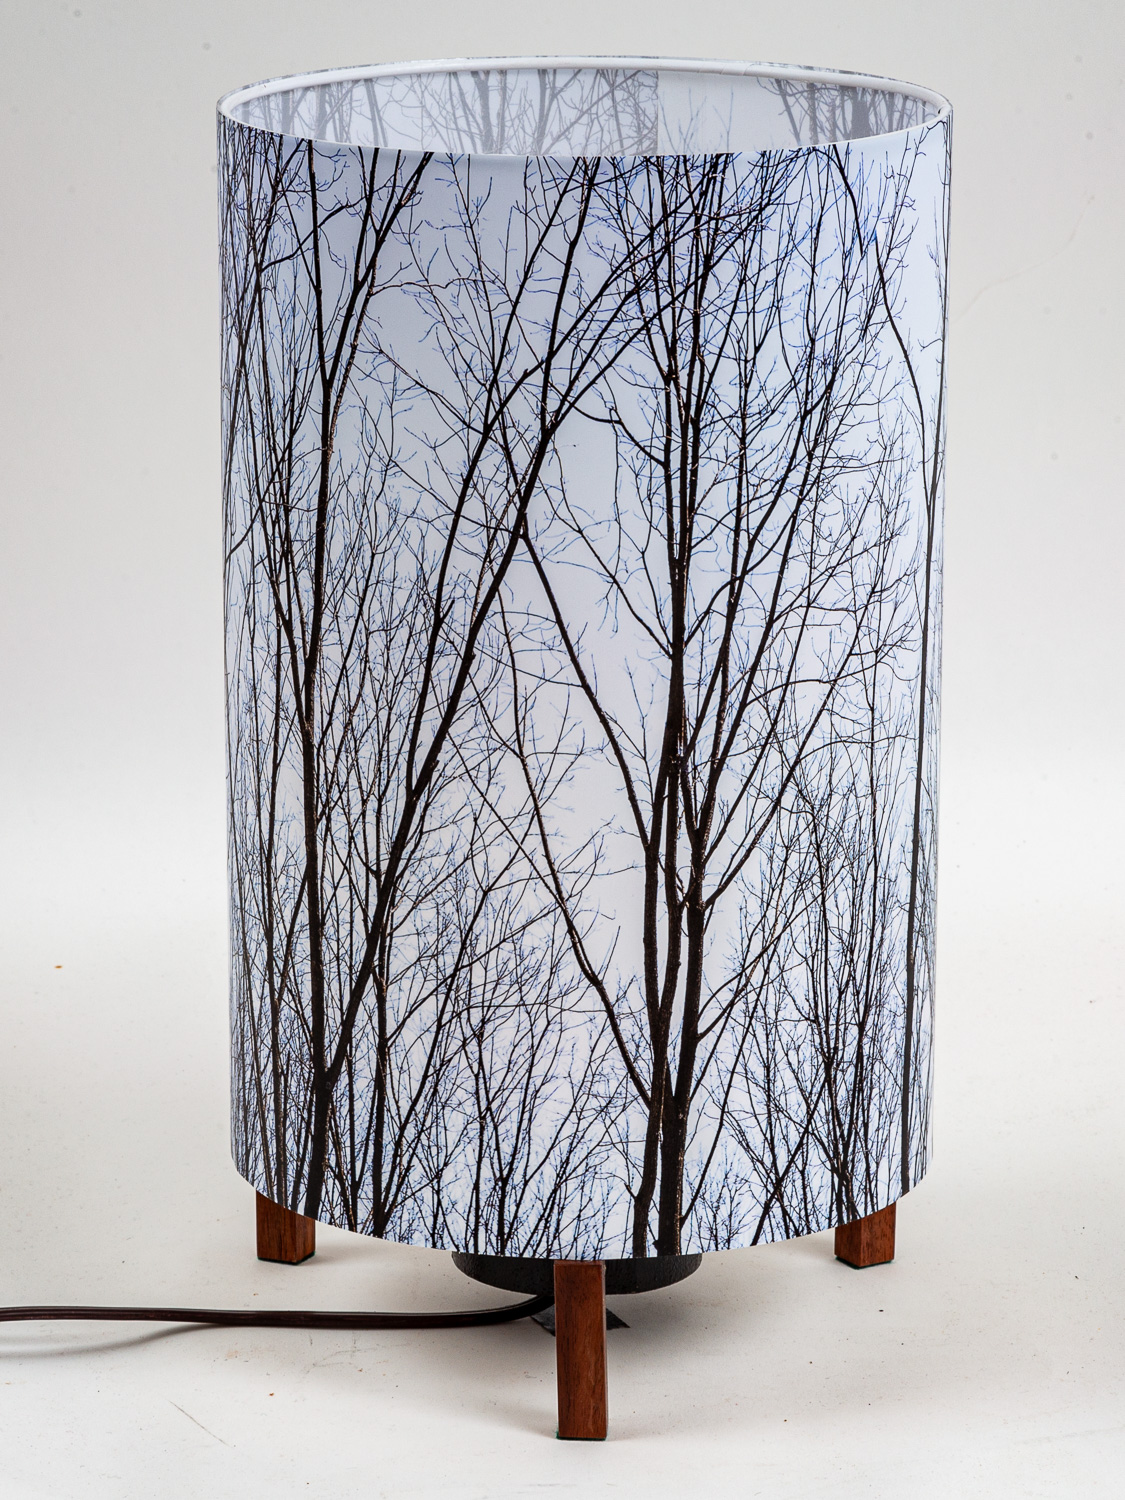 101: Lamp in a shade with walnut trees in winter -- Photo on Lamp shade by David Elmore